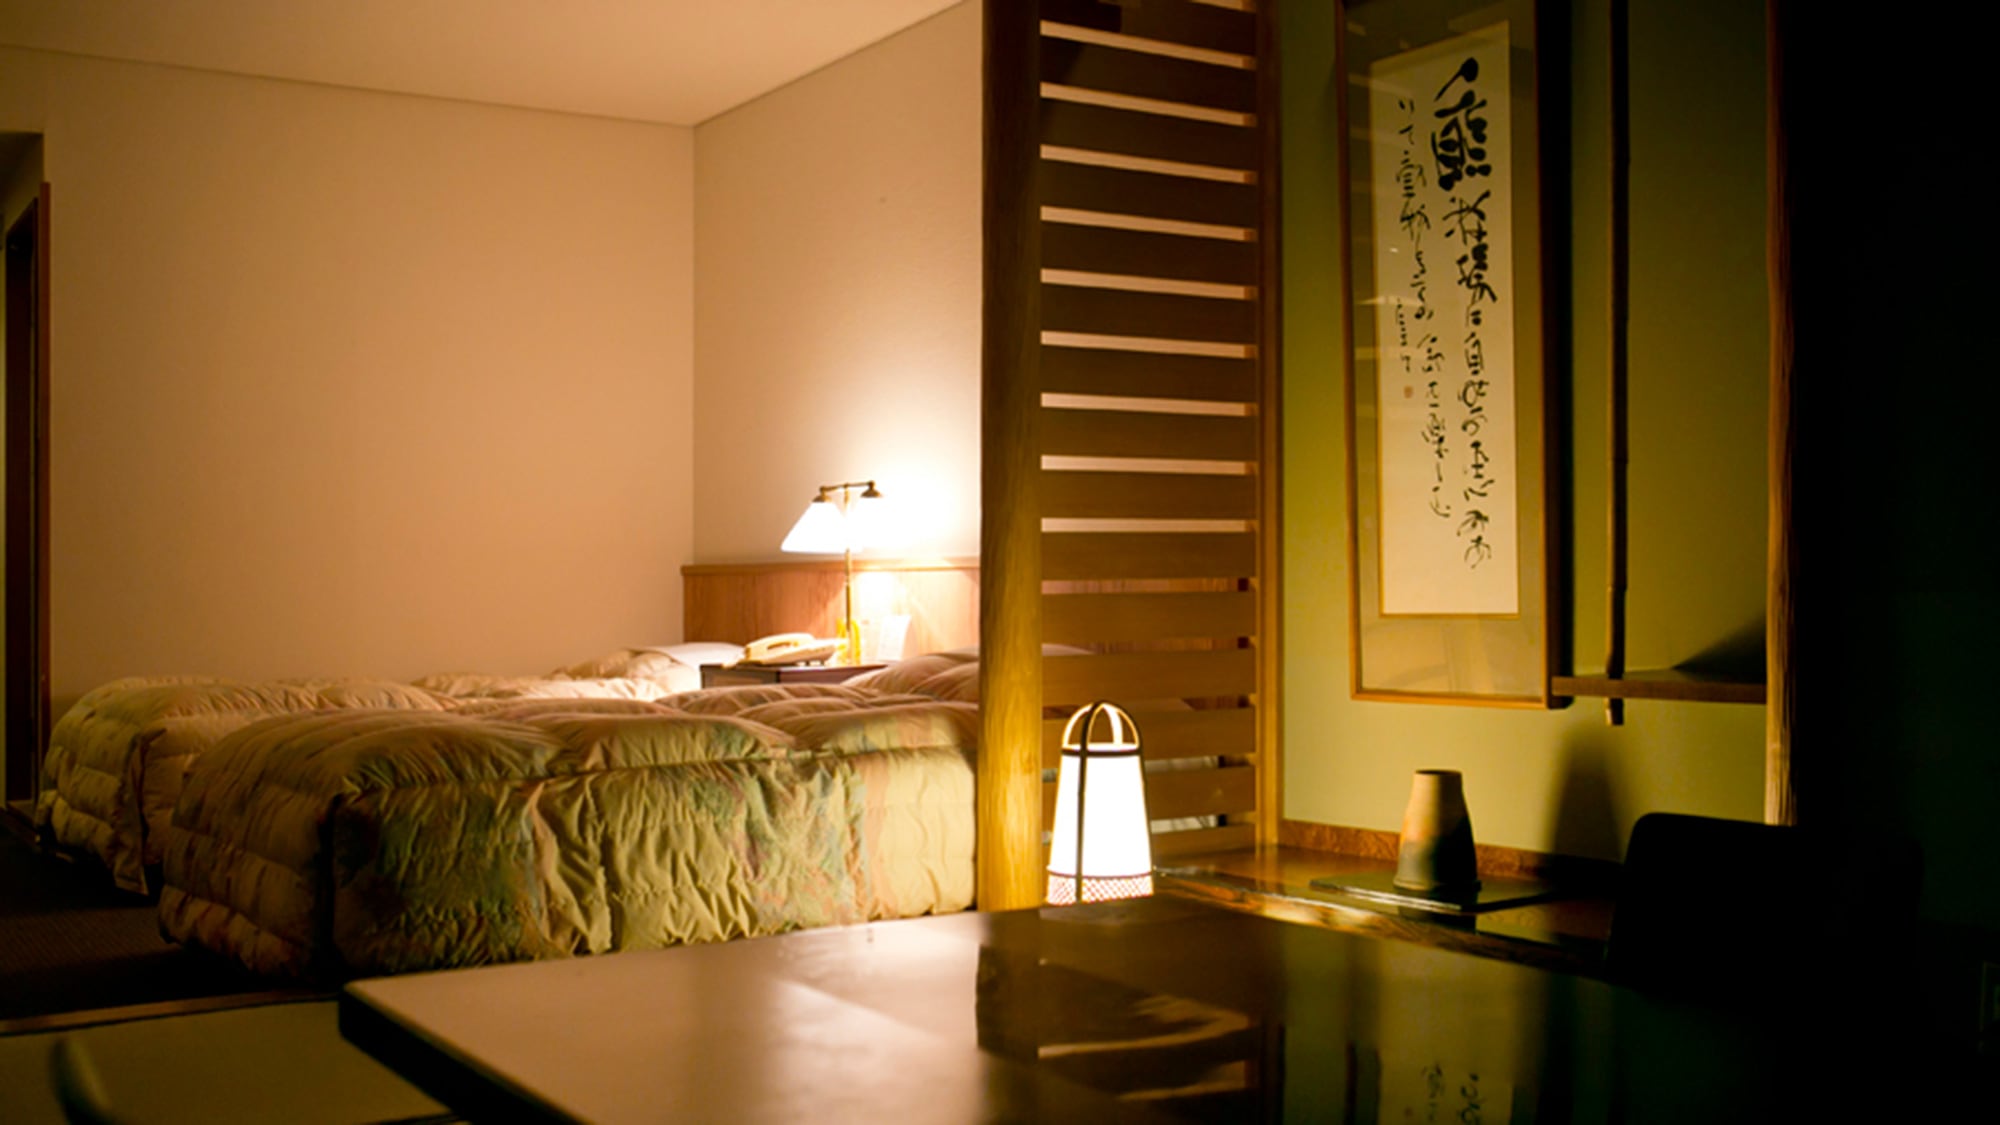 Japanese and Western room at night